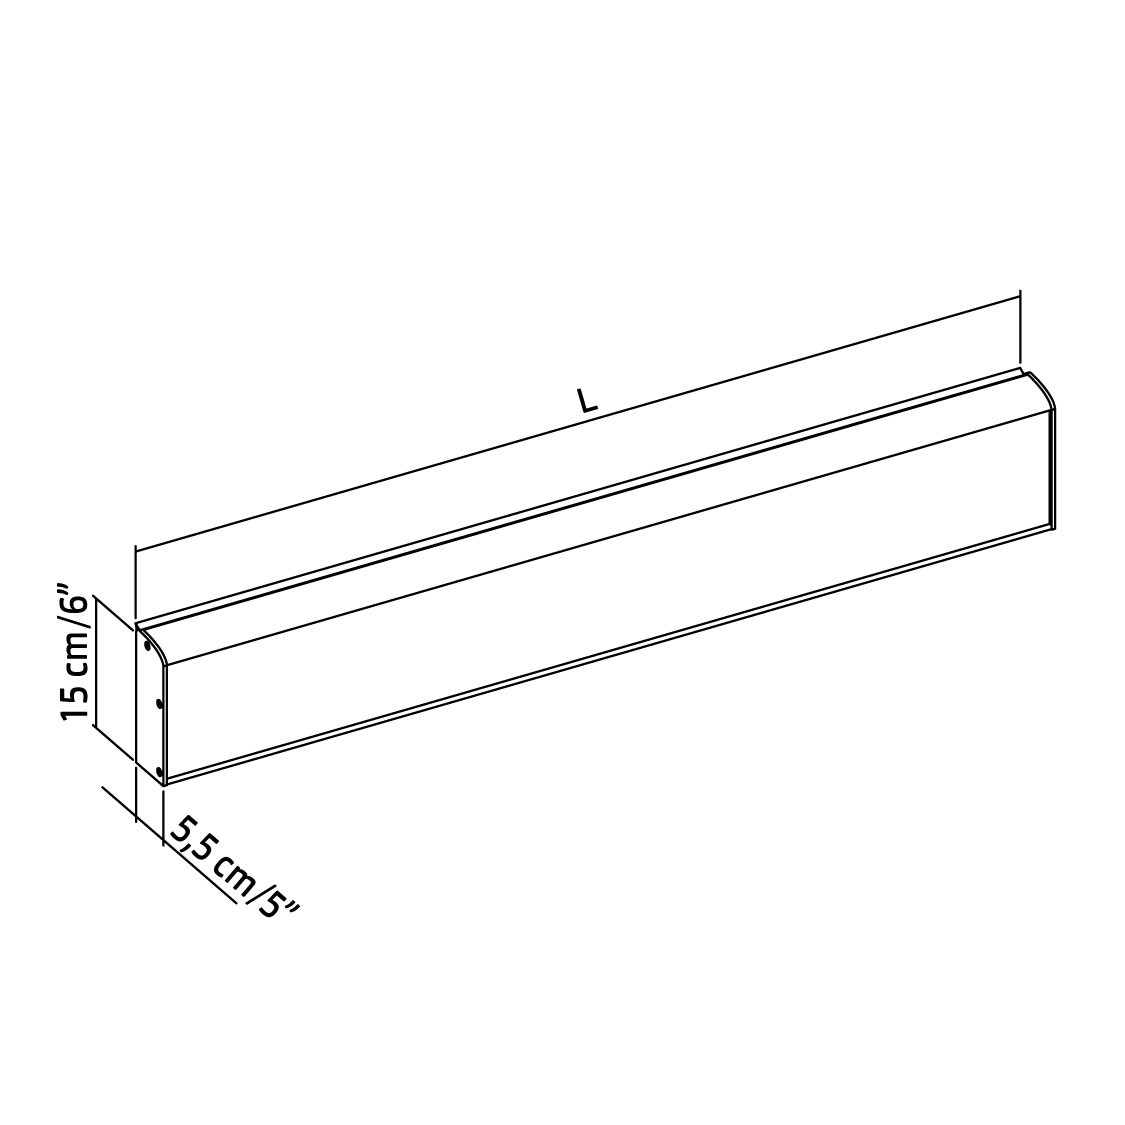 11-102-xx-wall-mounted-horizontal-track-with-cover-for-insert-and-side-caps-diagram